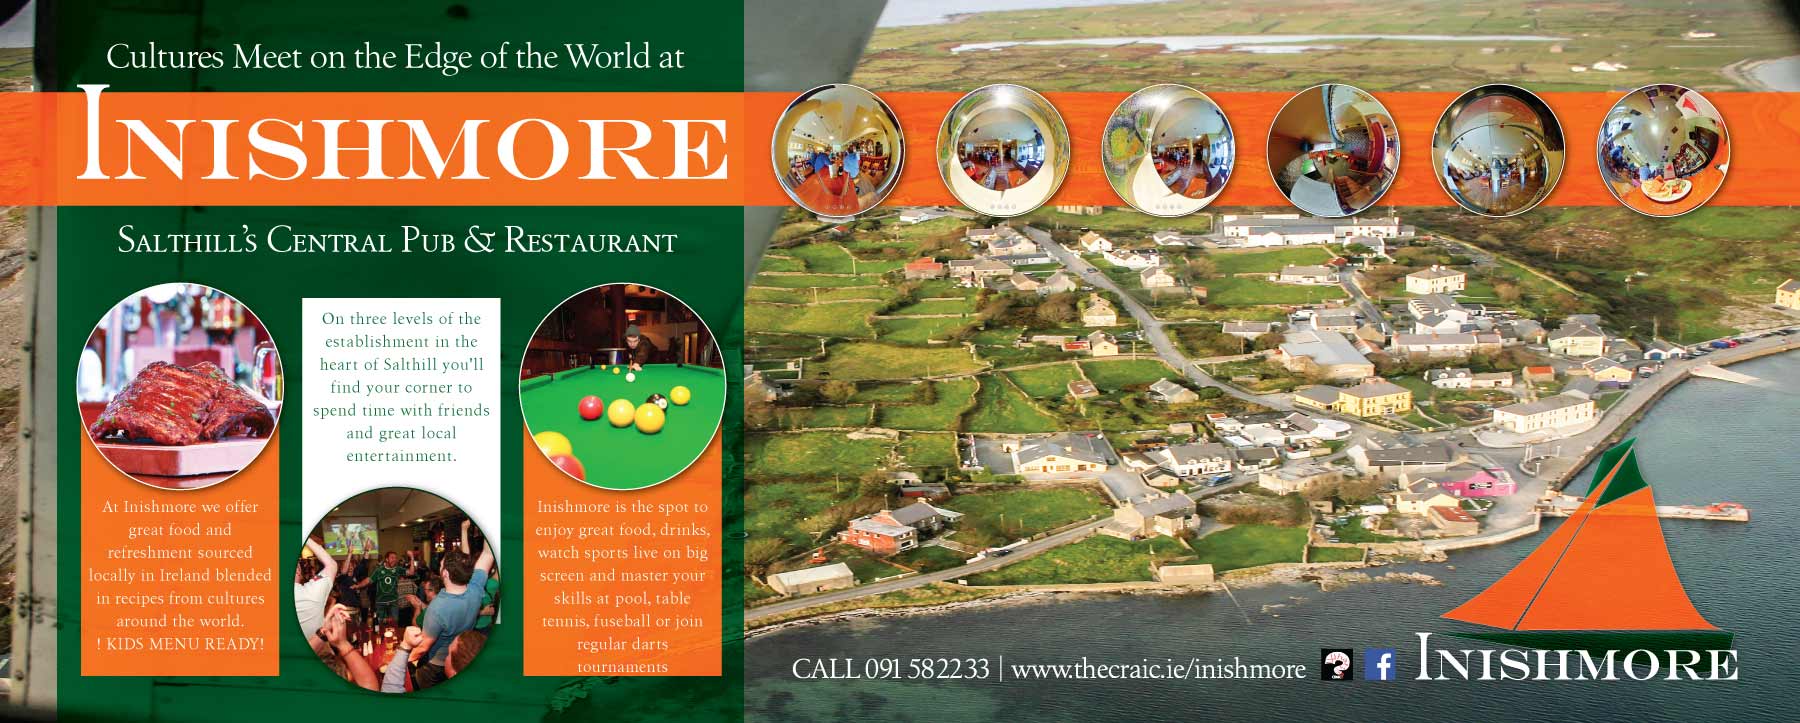 INISHMORE-CULTURES-MEET-HERE